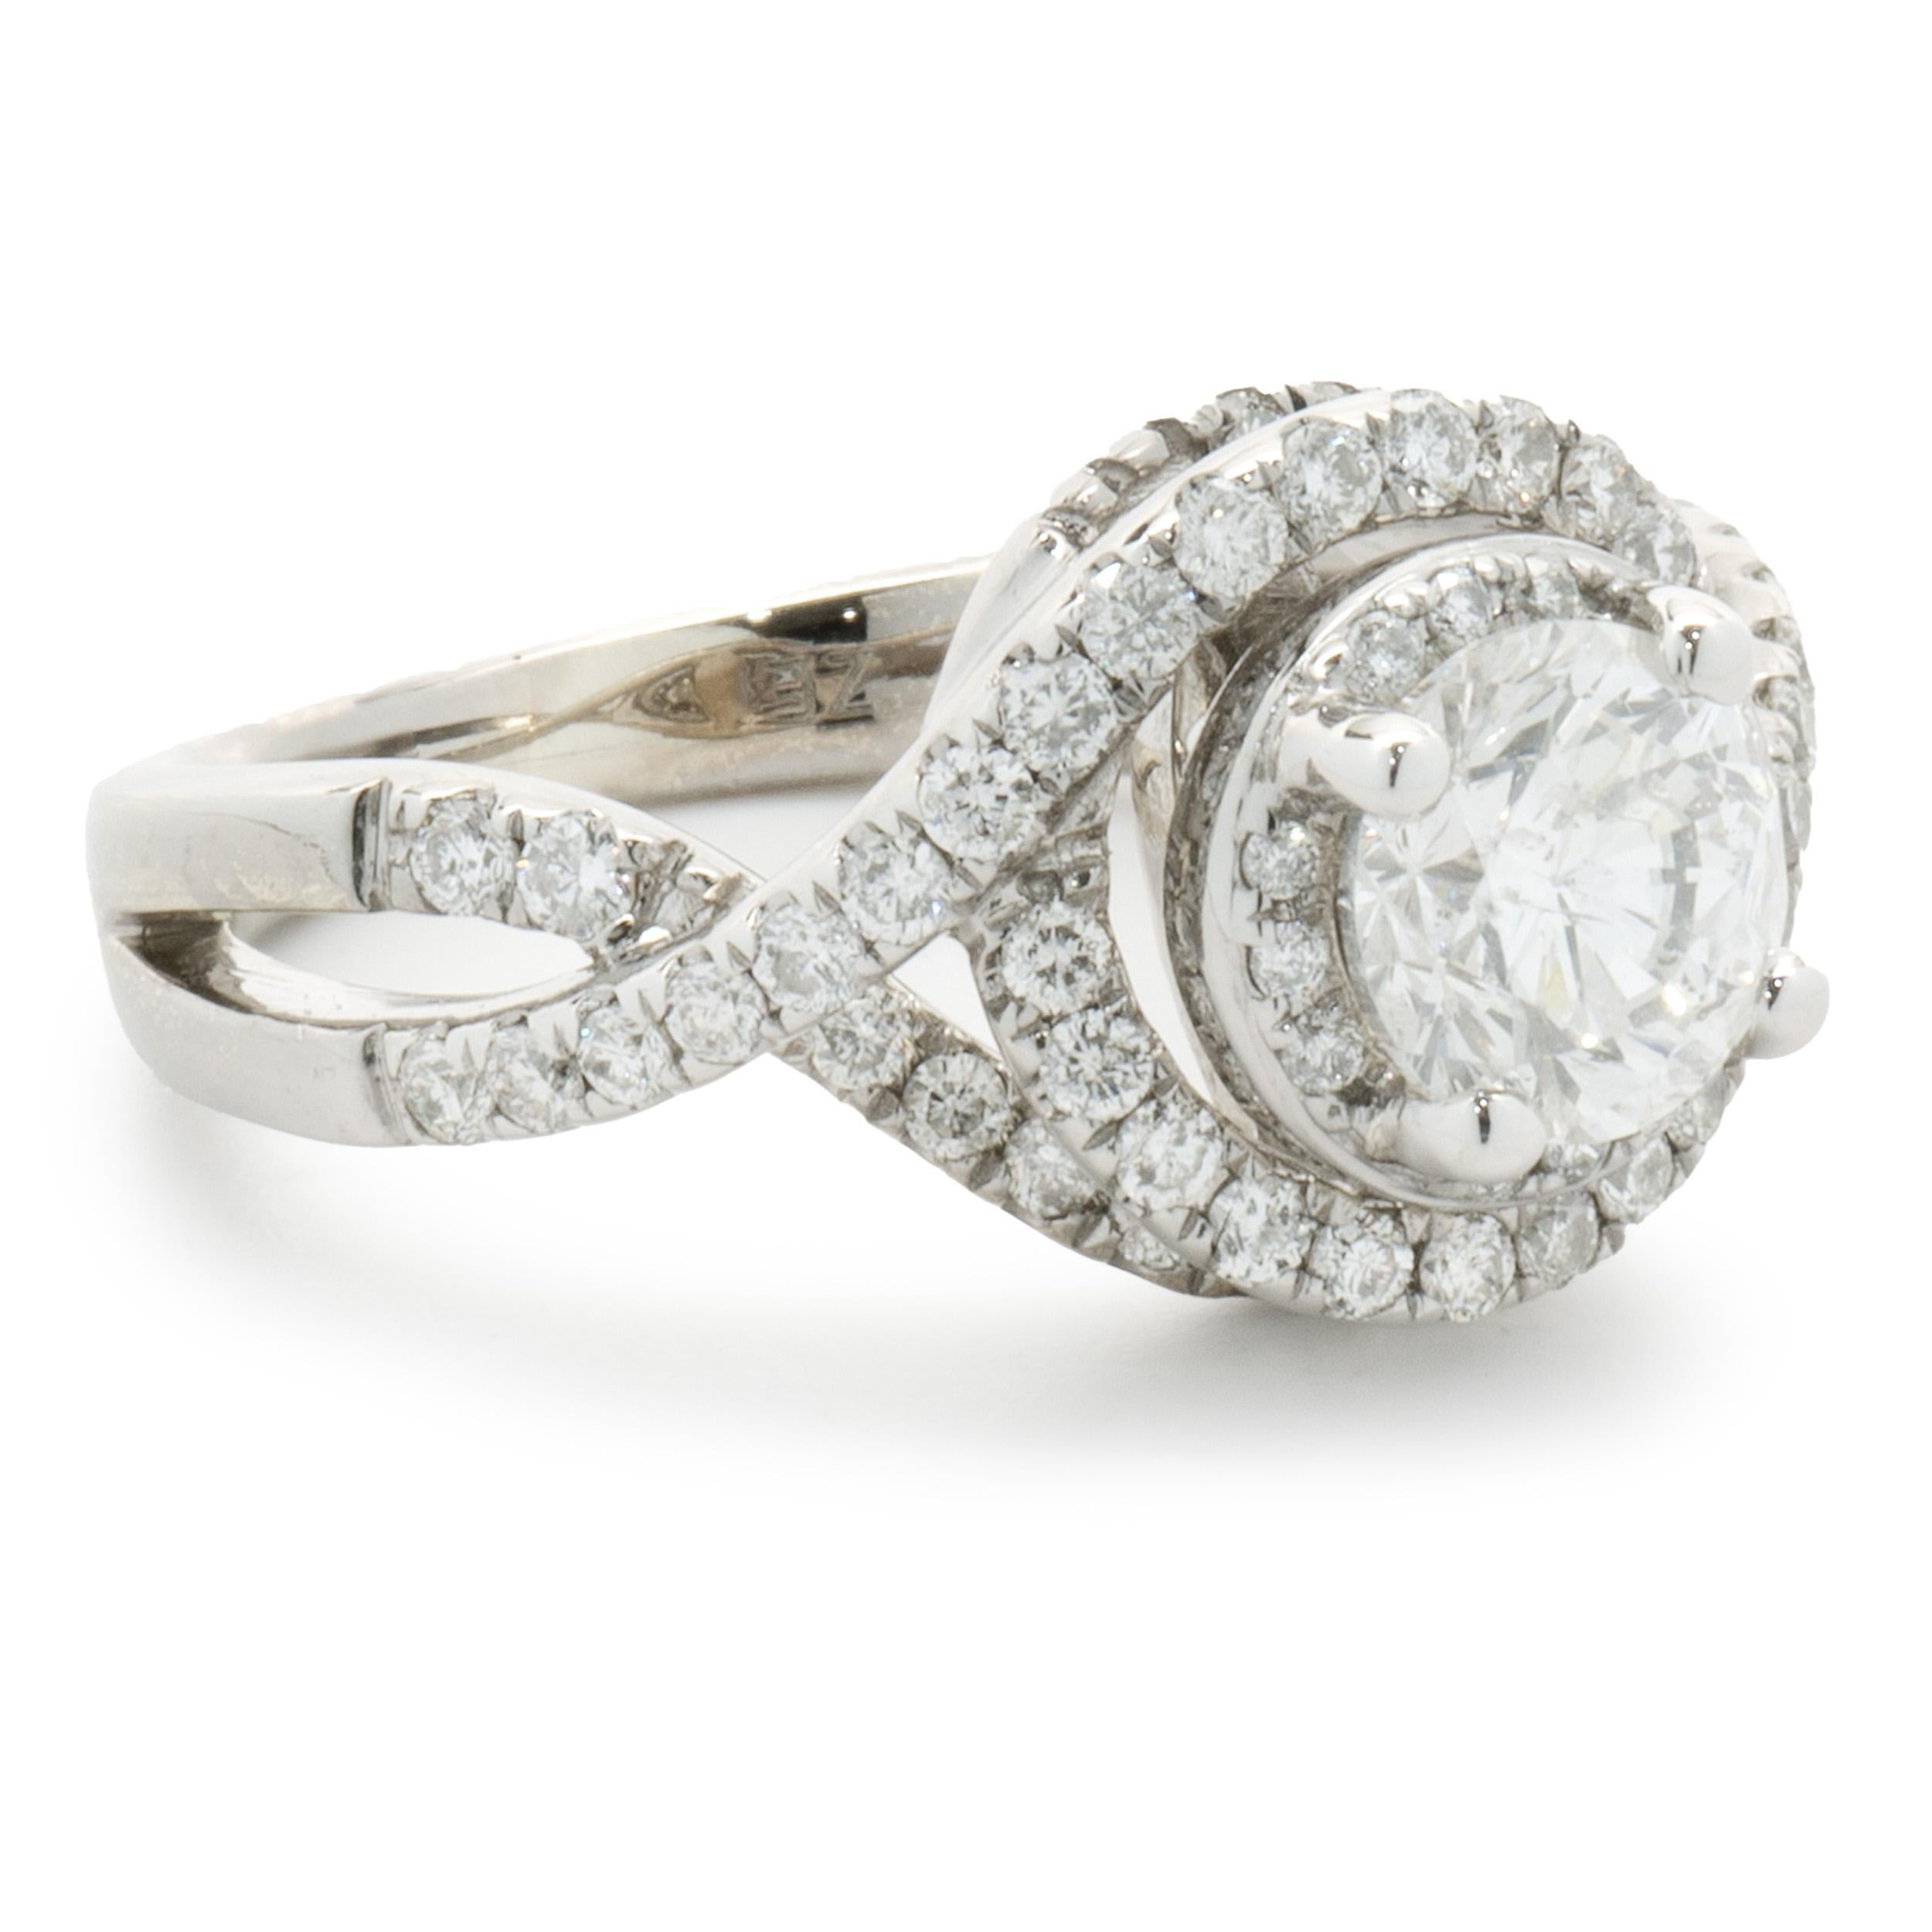 Designer: Custom
Material: 14K white gold
Diamond: 1 round brilliant cut = 0.77ct
Color: I
Clarity: I1
Diamond: 50 round brilliant cut = 0.50cttw
Color: H
Clarity: SI1
Dimensions: ring top measures 11mm wide
Ring Size: 5 (complimentary sizing